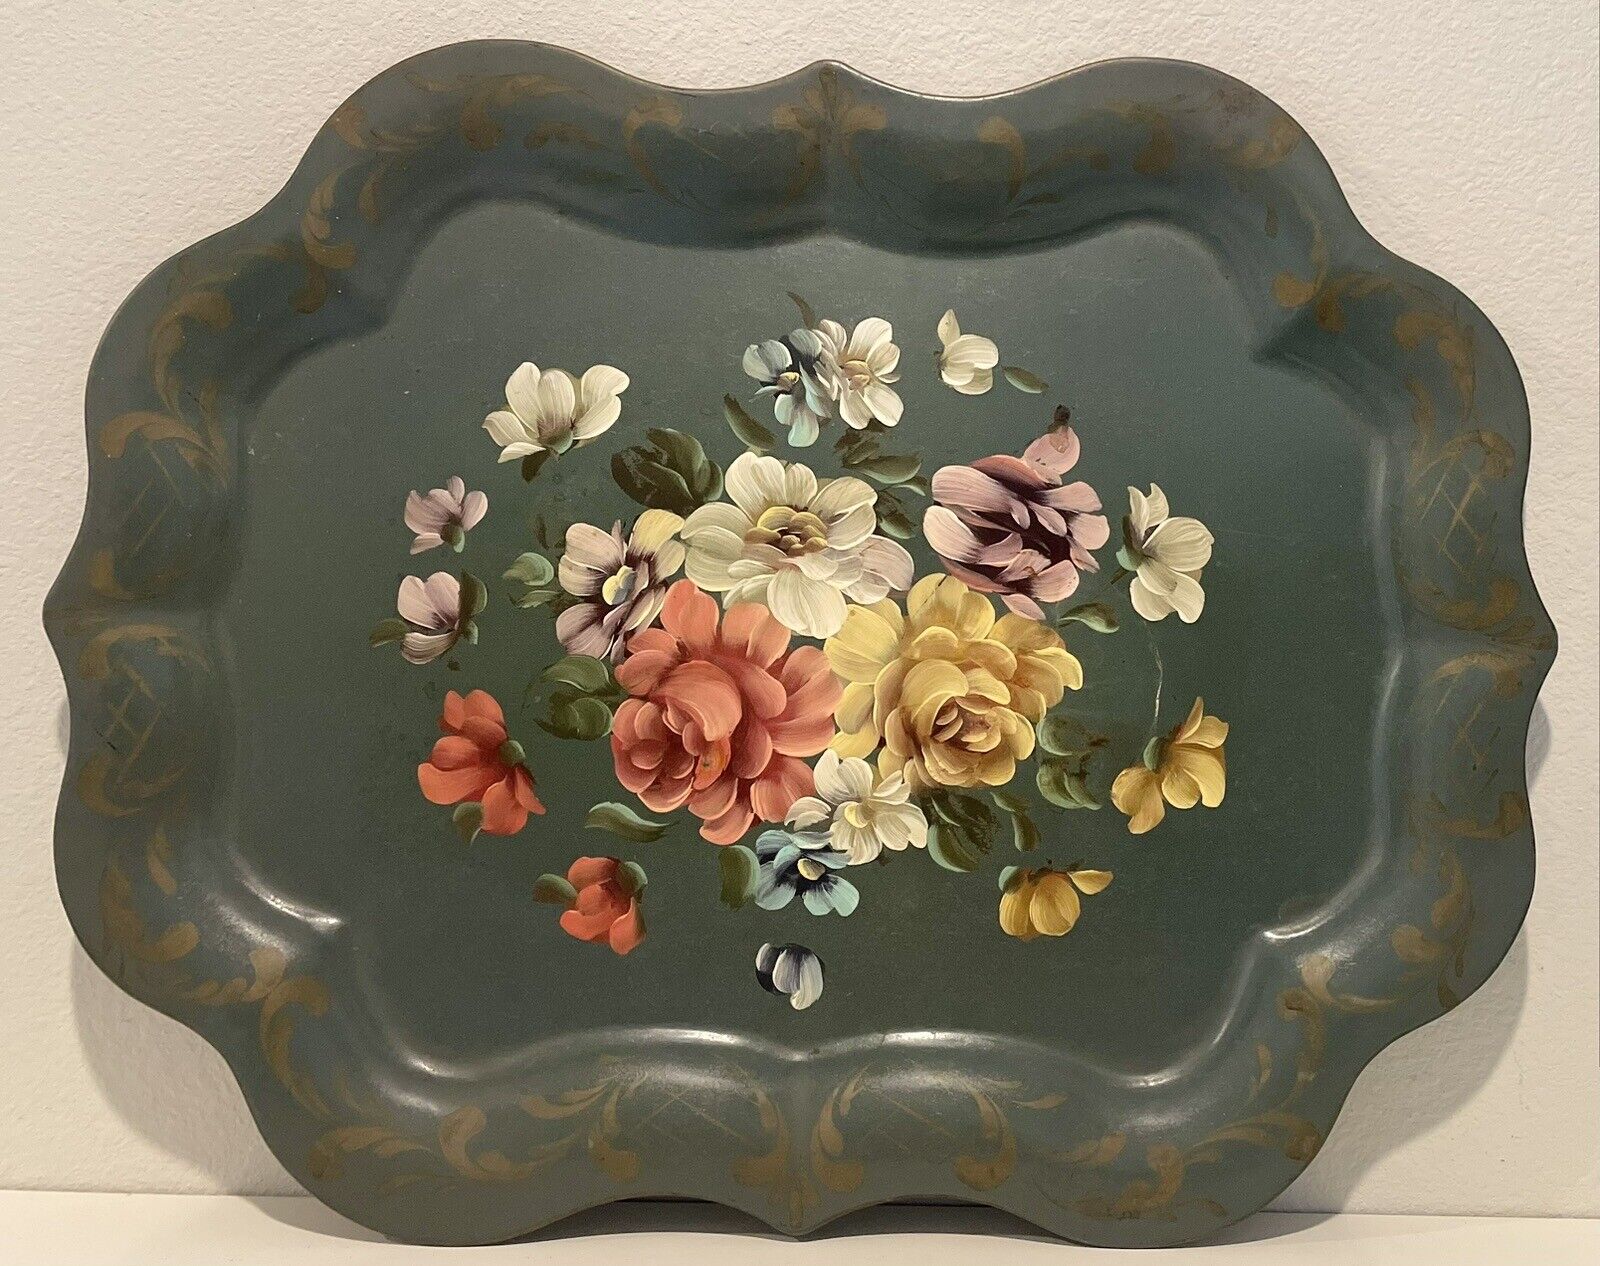 Gorgeous Aqua Tole Tray - Hand painted, Multicolor Roses, Hard To Find Color